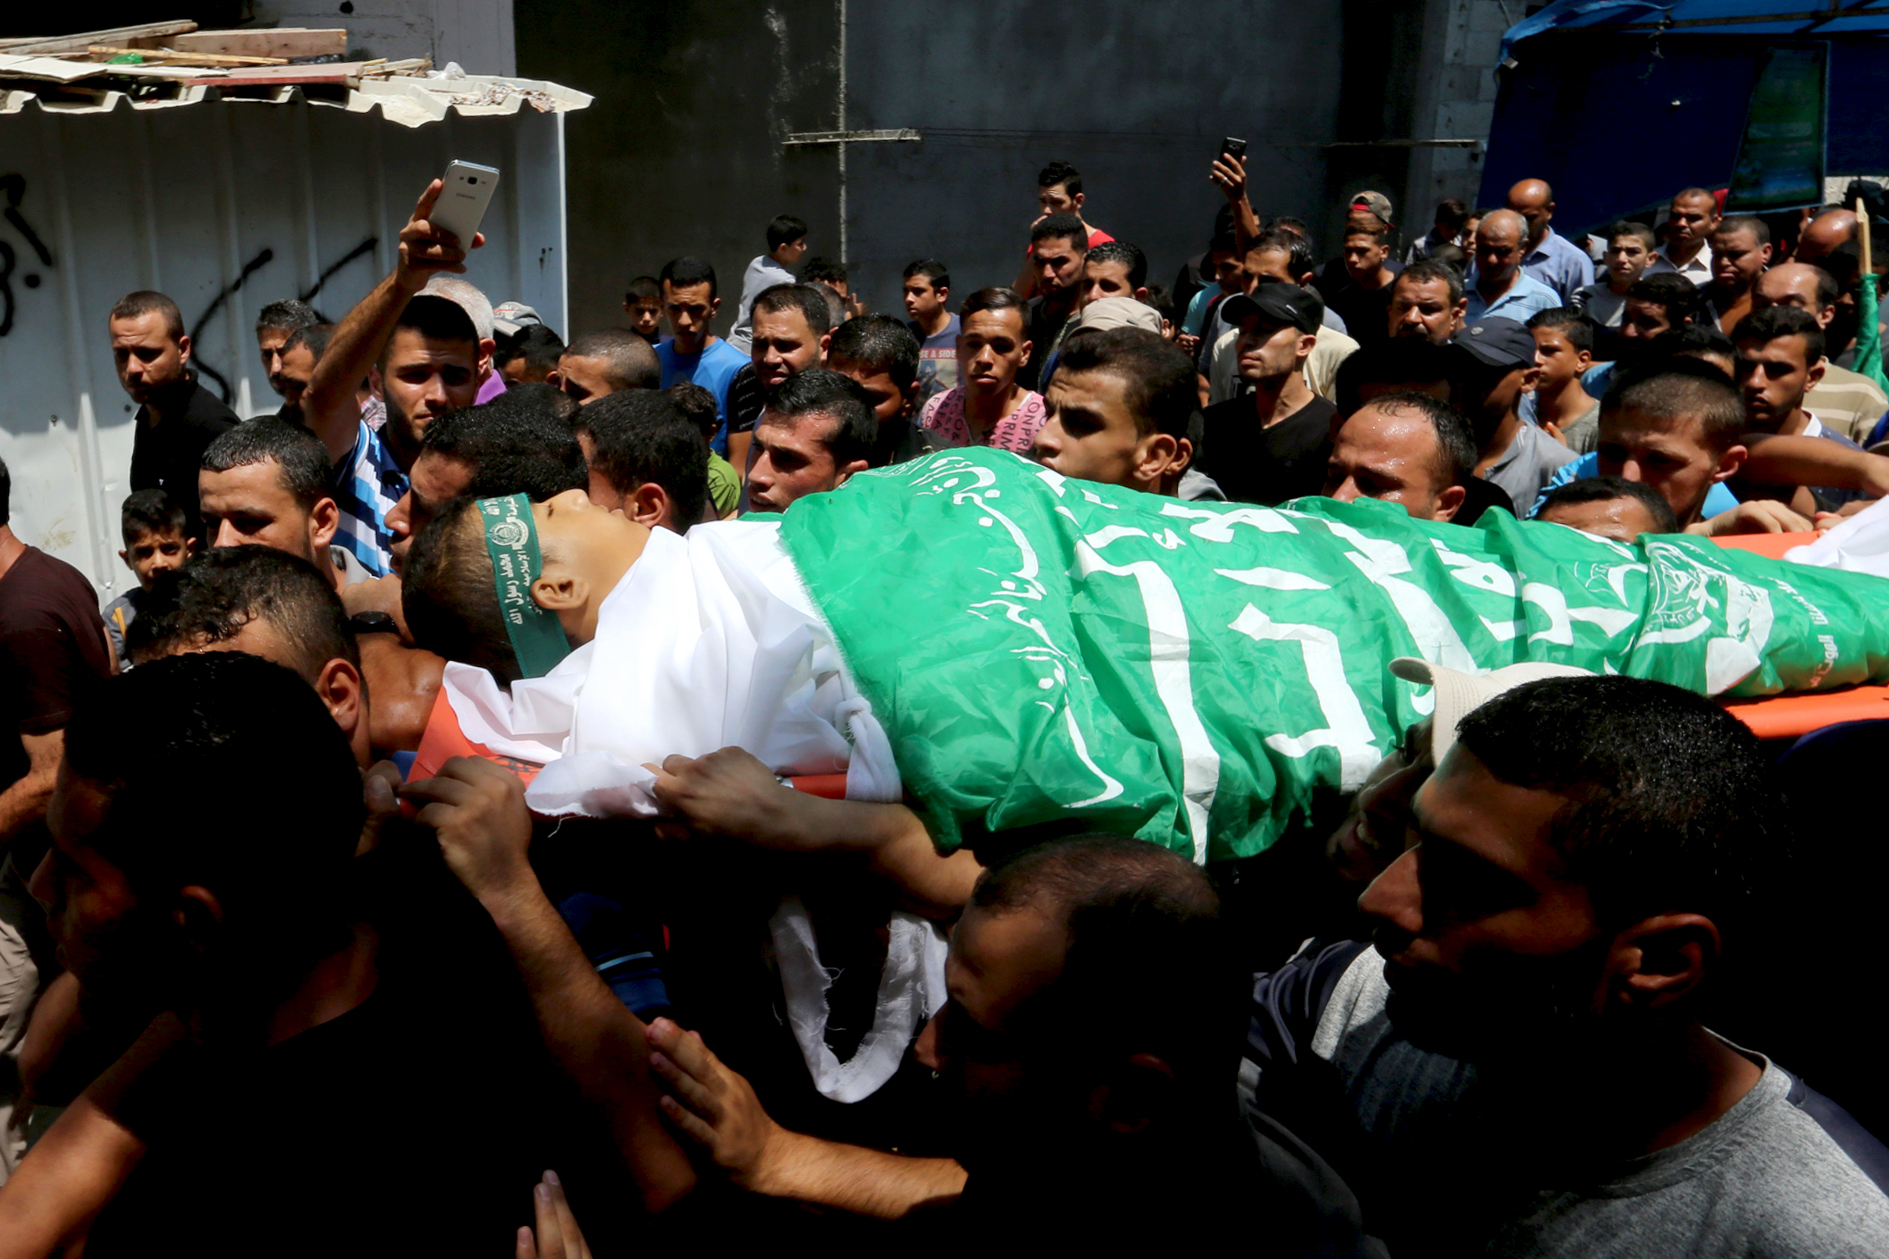 PALESTINIAN-ISRAEL-GAZA-CONFLICT-FUNERAL